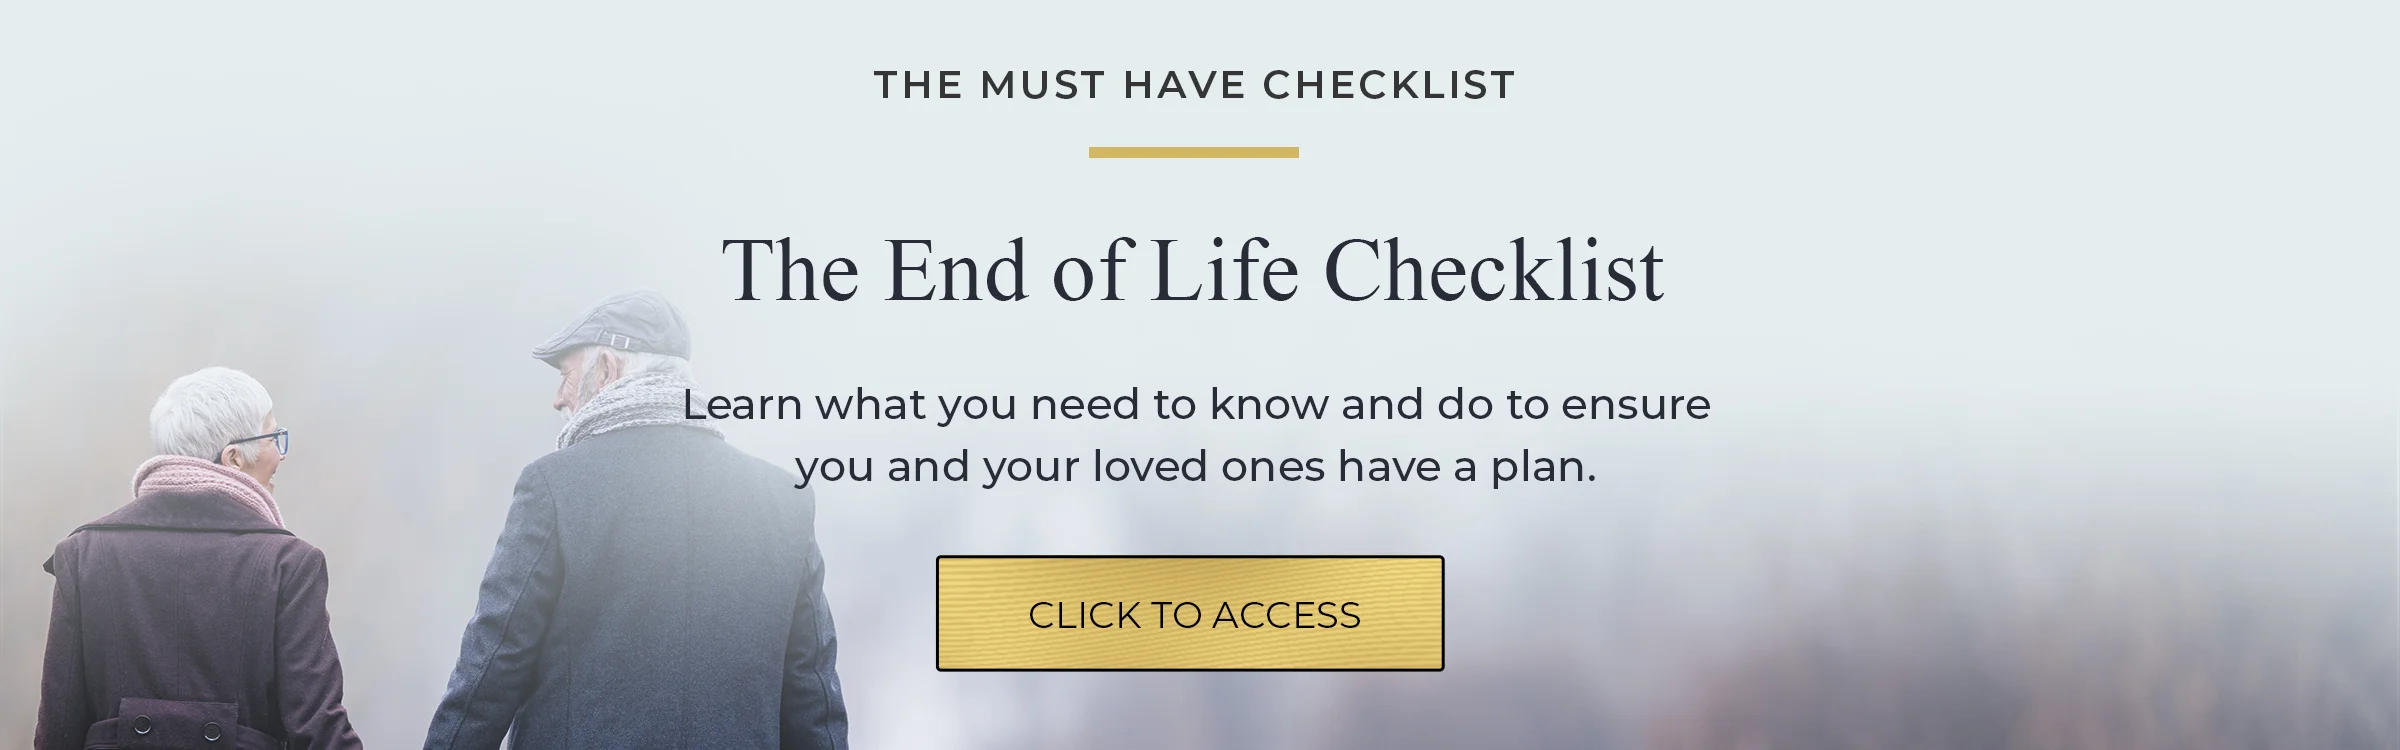 End of life checklist